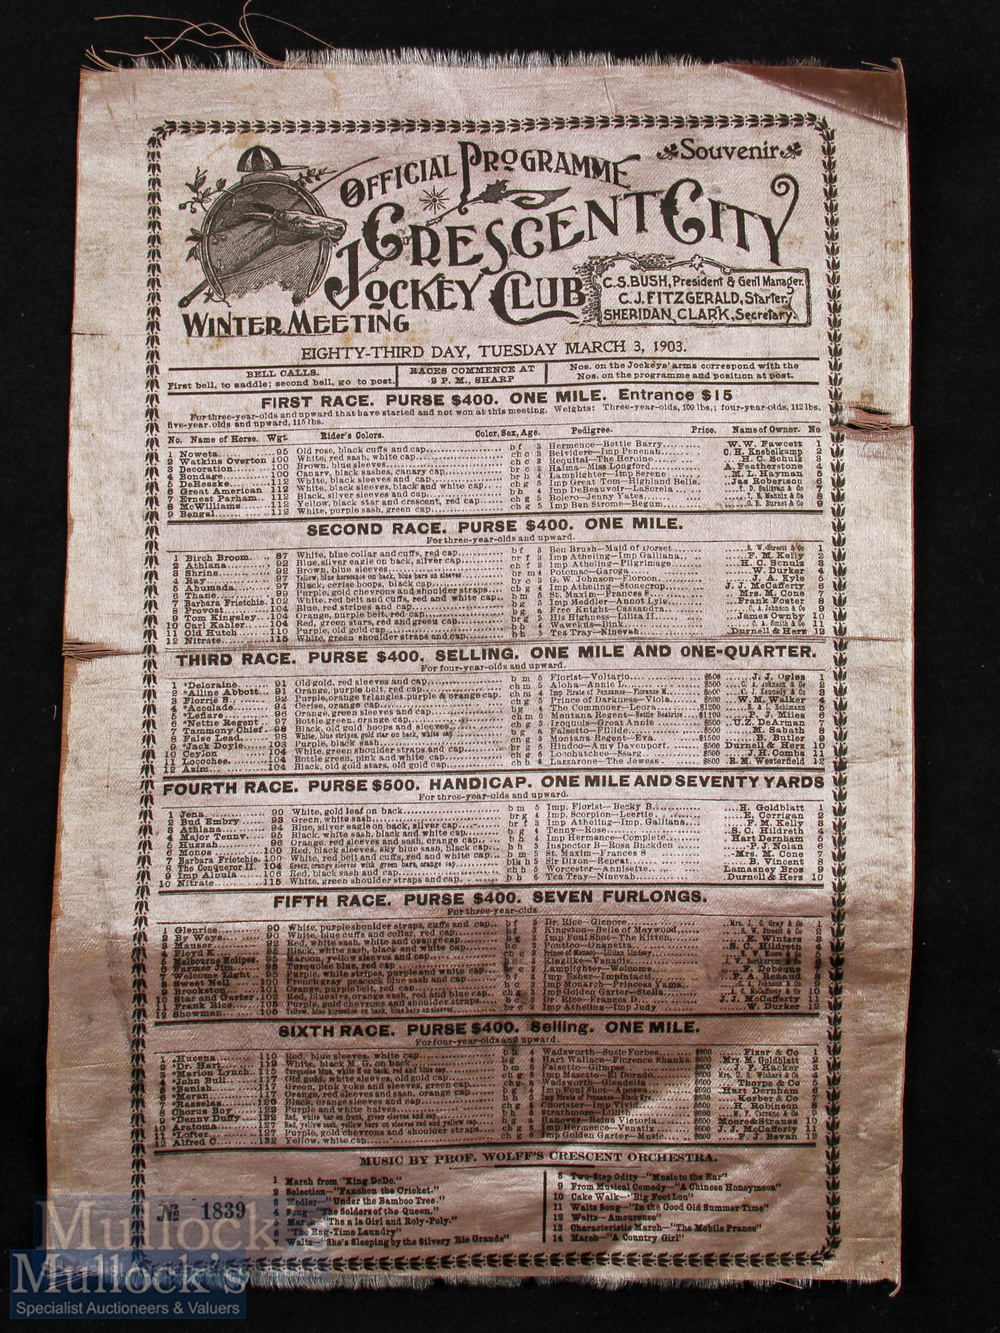 United States - Crescent City Jockey Club 1903 Silk Programme of that day's horse races. Listing the